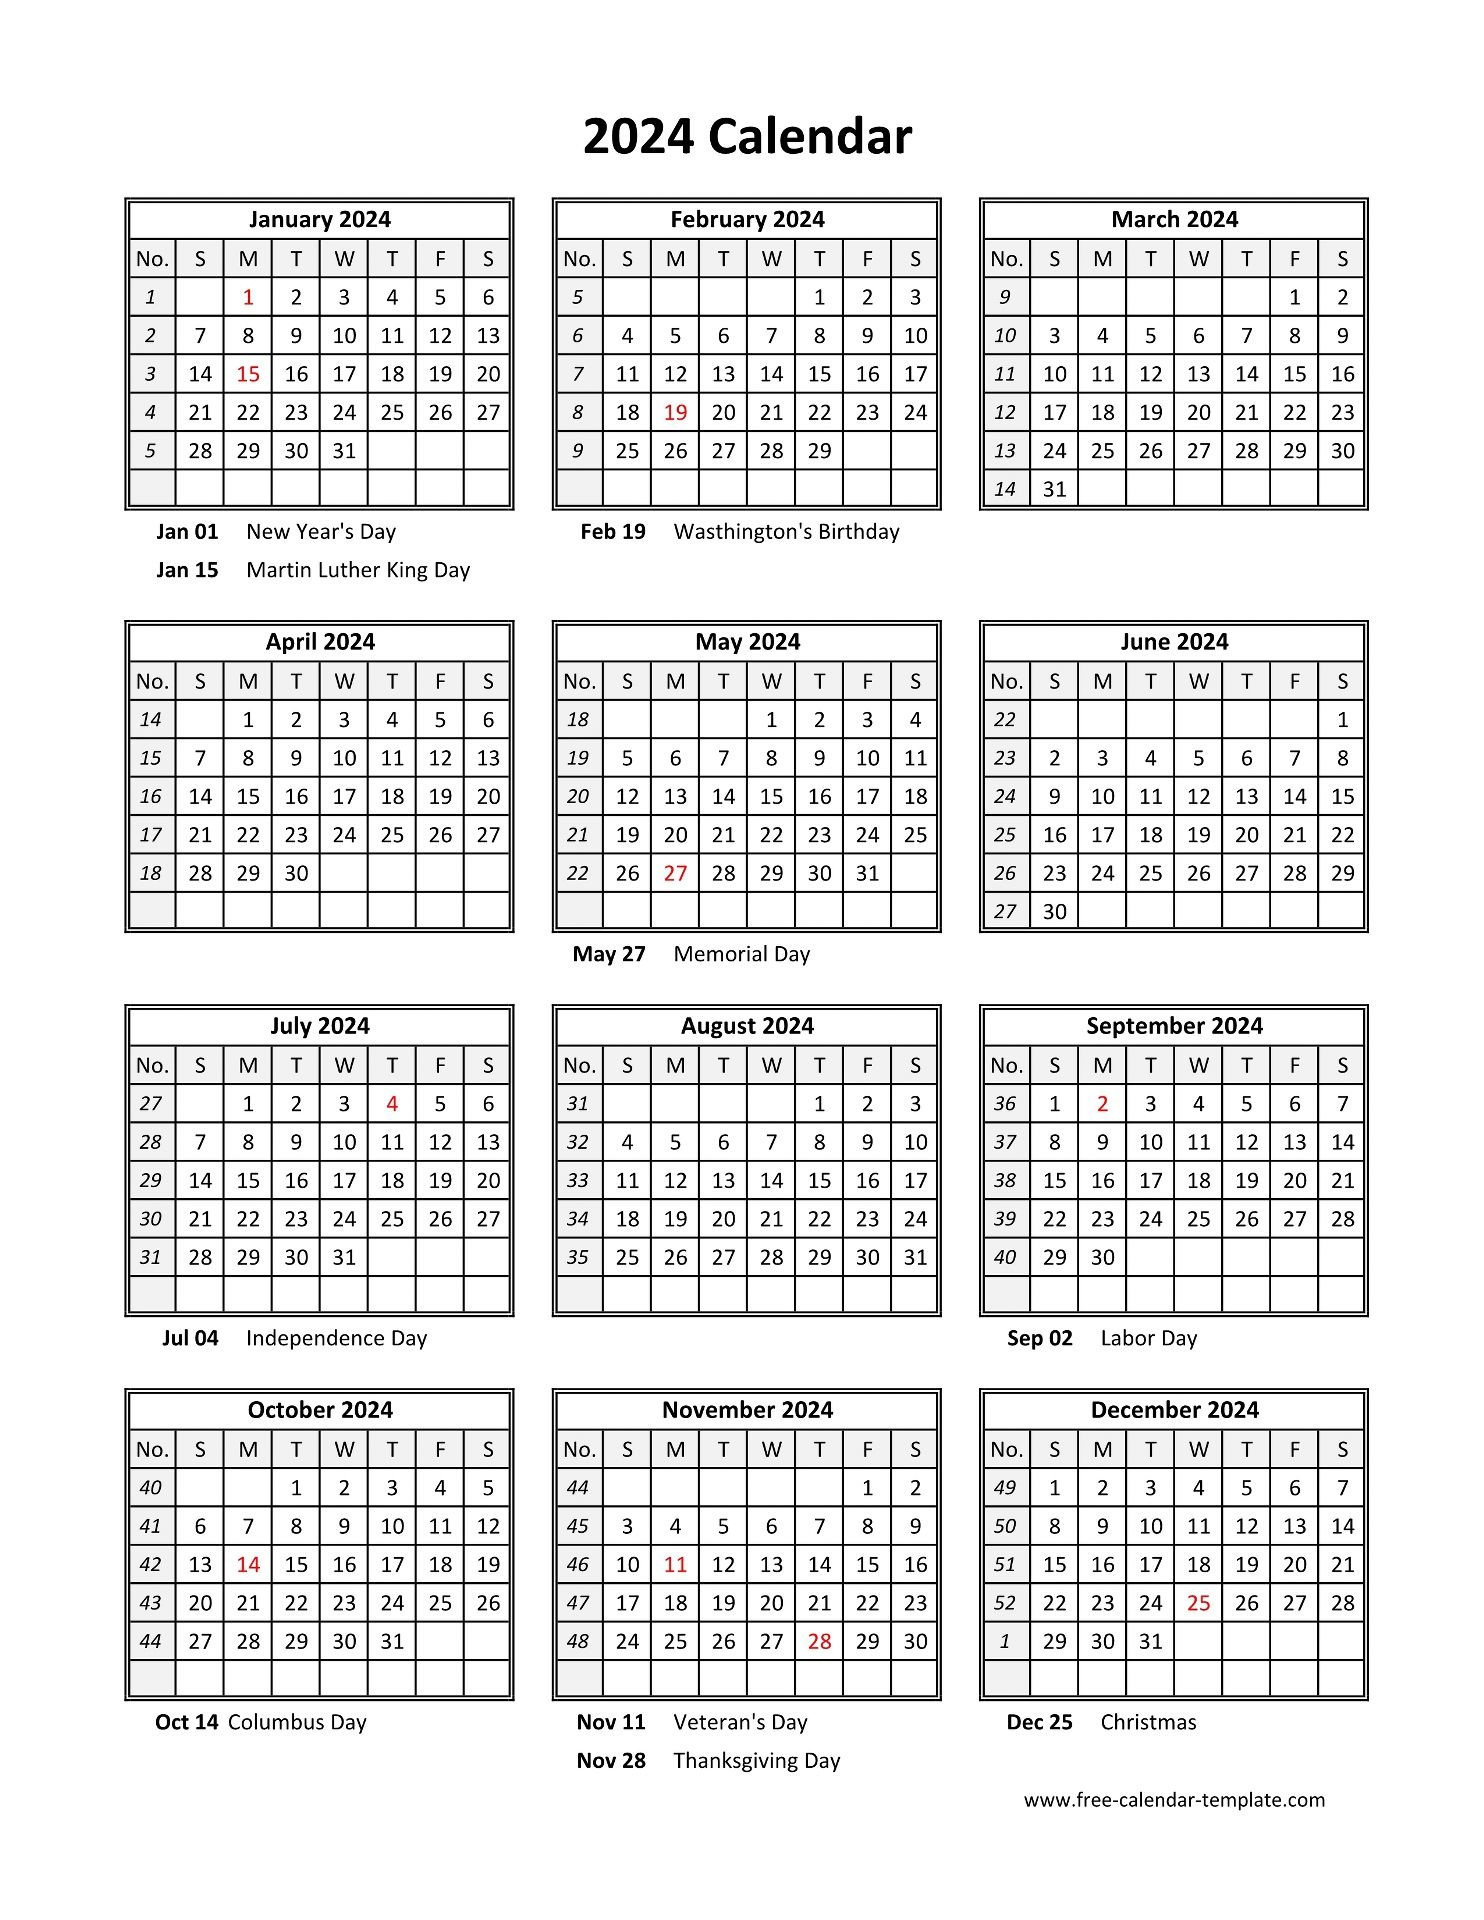 Yearly Printable Calendar 2024 With Holidays | Free-Calendar | 2024 Printable Calendar One Page With Holidays Free Download